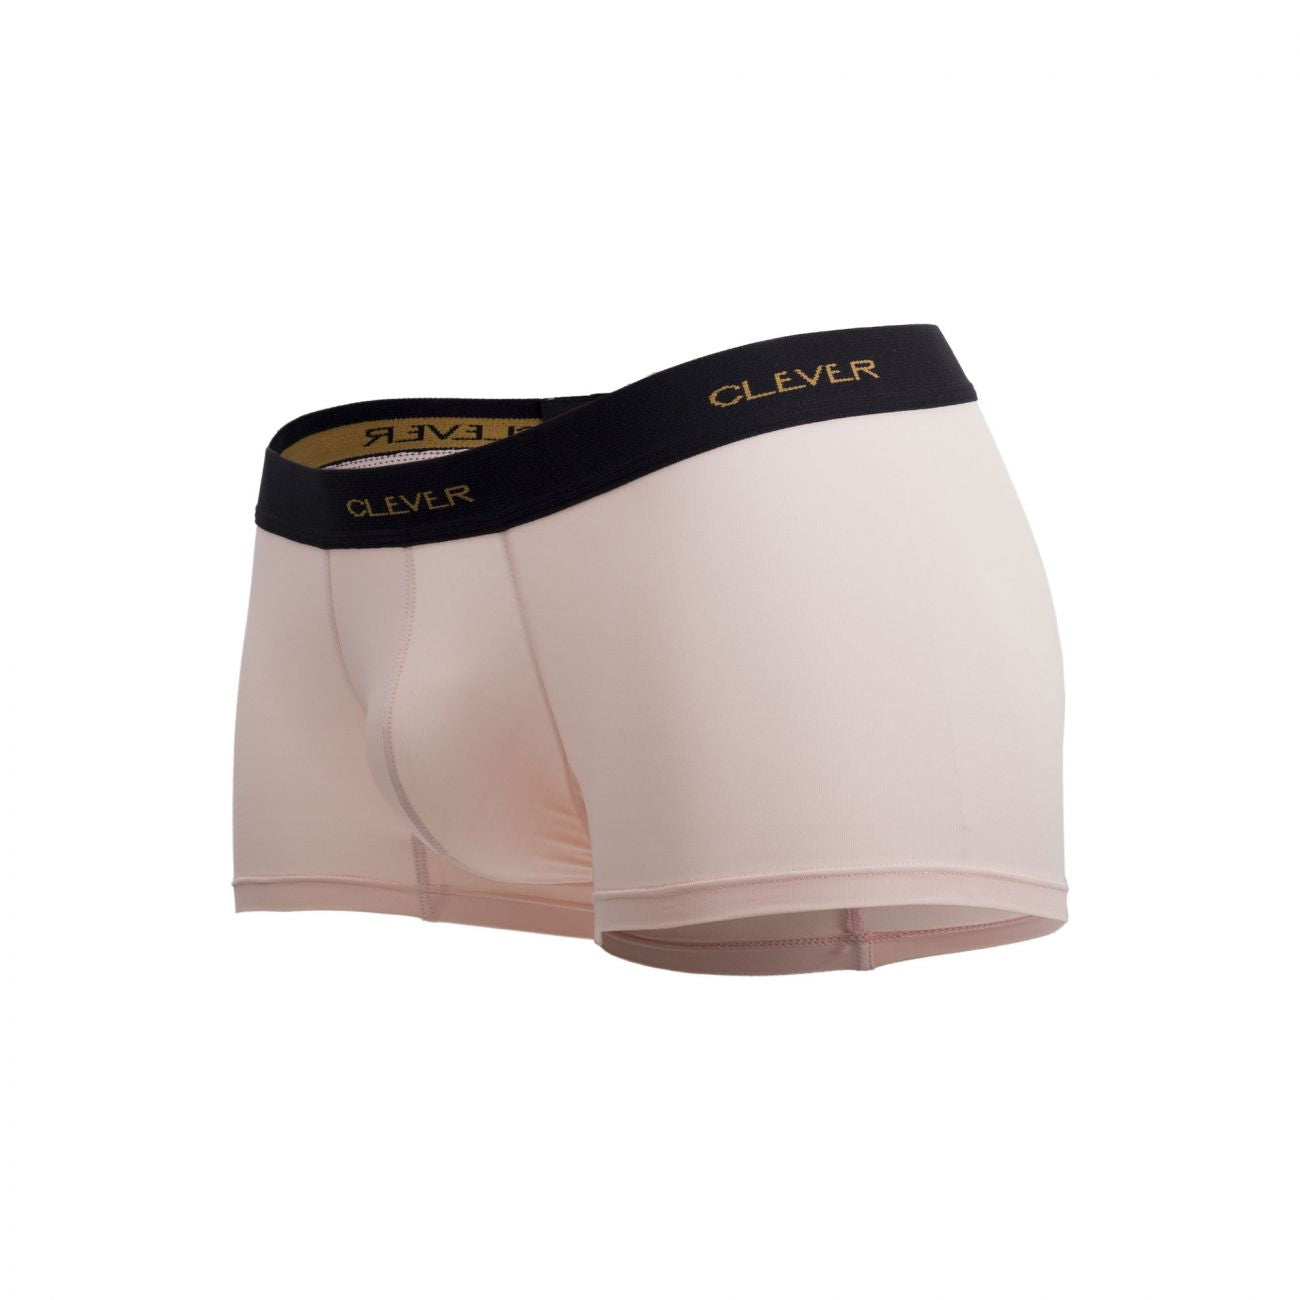 Clever 2199 Limited Edition Boxer Briefs Trunks Pink